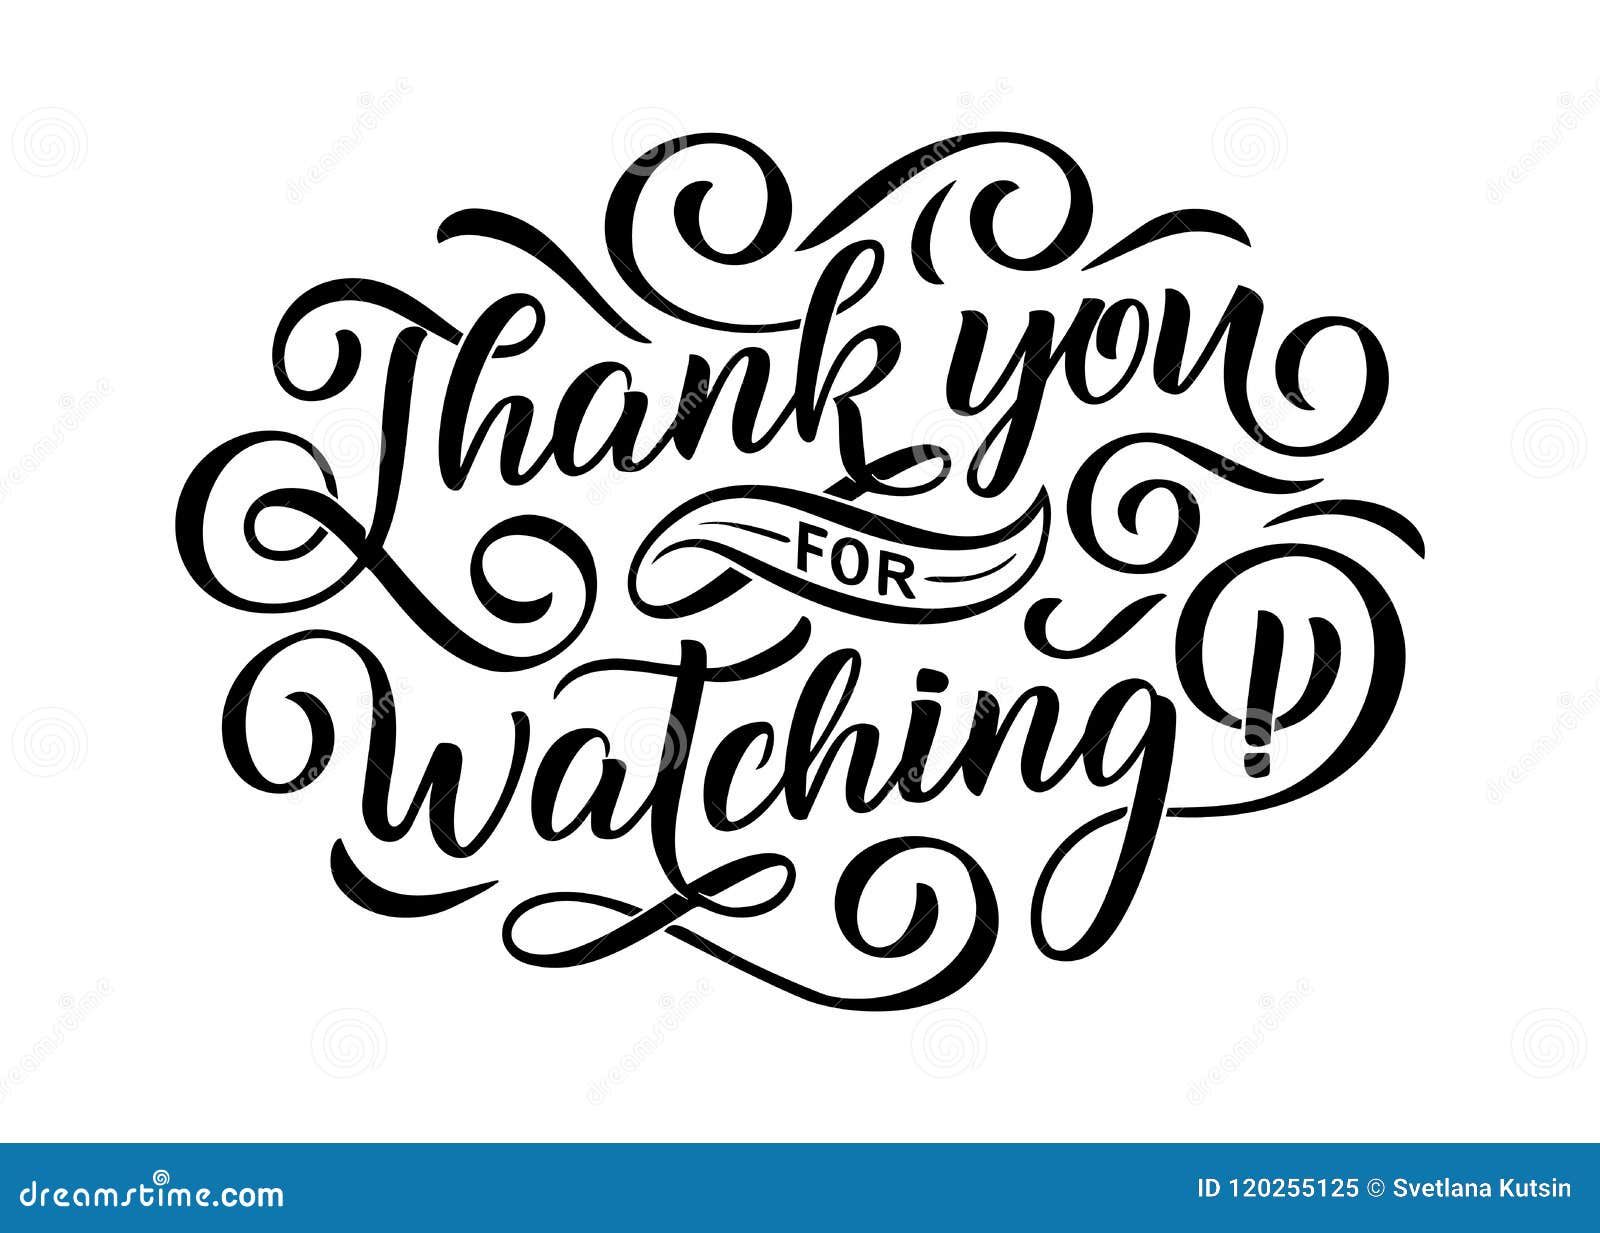 Thank You Watching Stock Illustrations 93 Thank You Watching Stock Illustrations Vectors Clipart Dreamstime